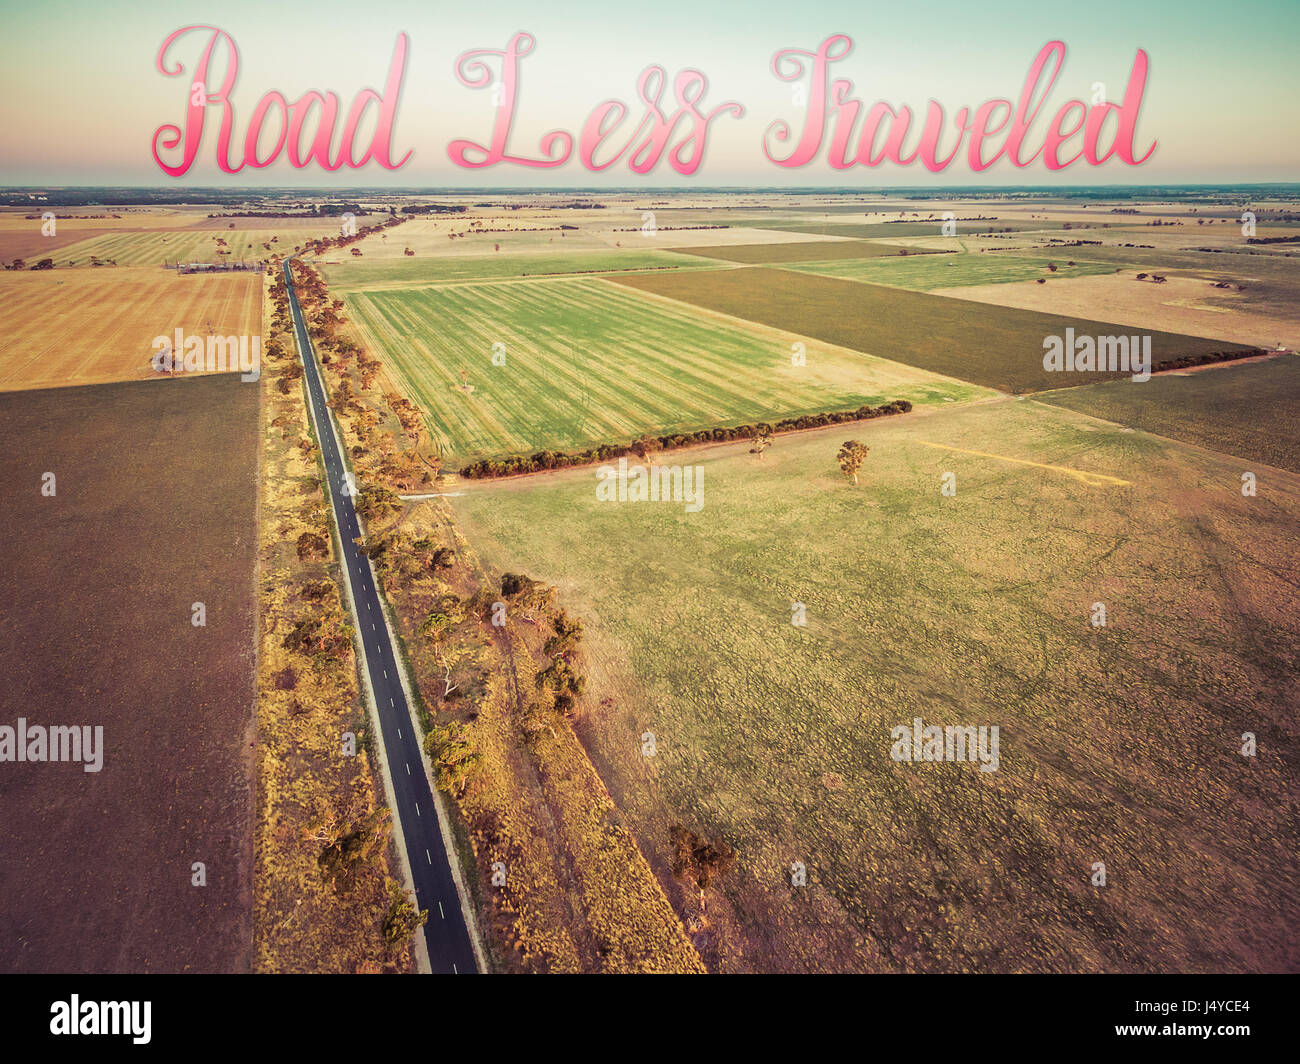 Rural highway passing among agricultural fields into horizon with Road Less Traveled handwritten lettering text Stock Photo